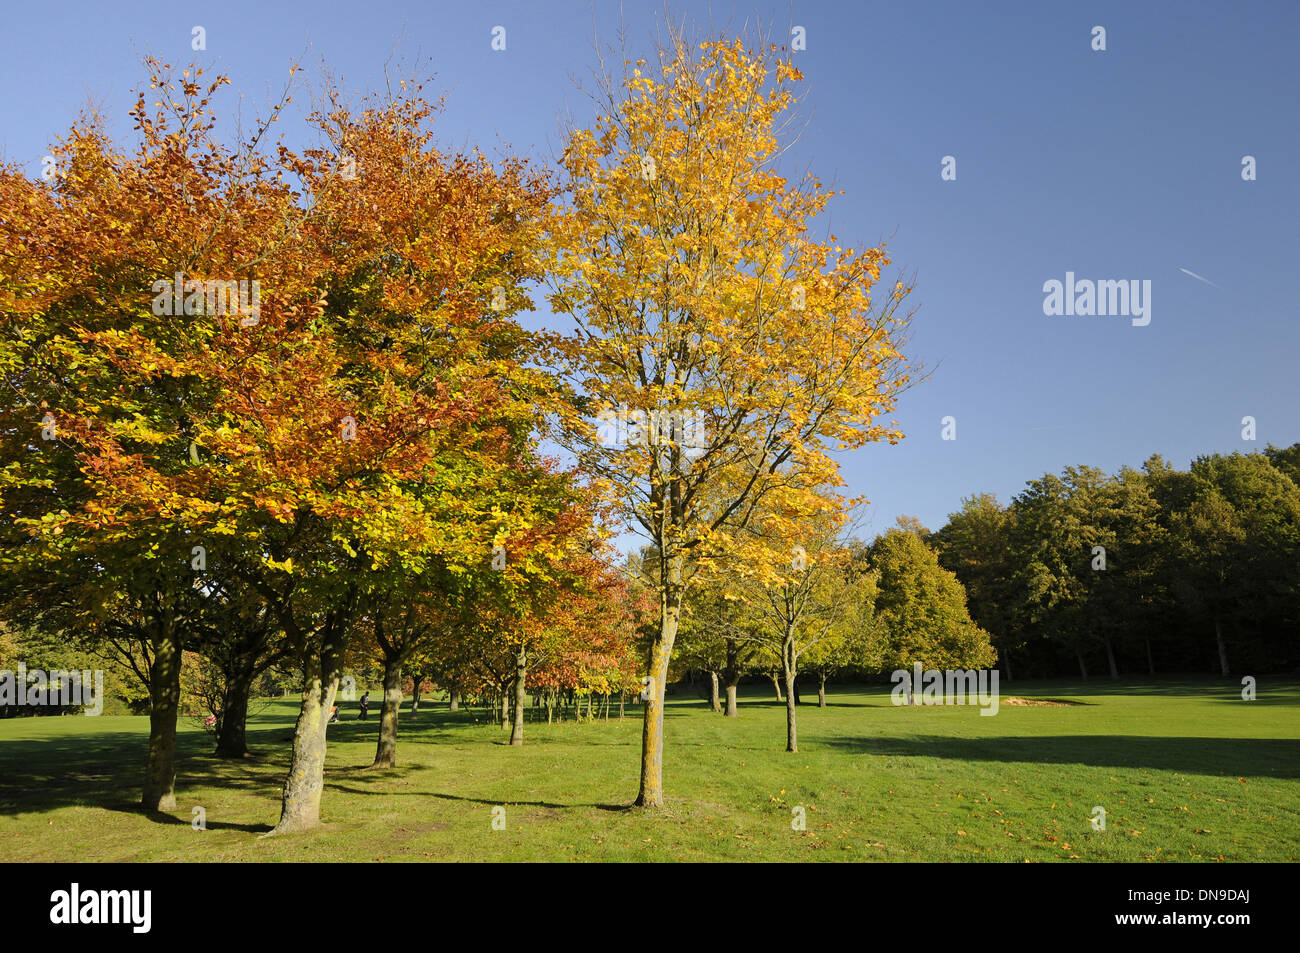 Sundridge Park Golf Club - View down Fairway of 16th Hole on the East Course with Bunker and with colourful Autumn Trees Stock Photo